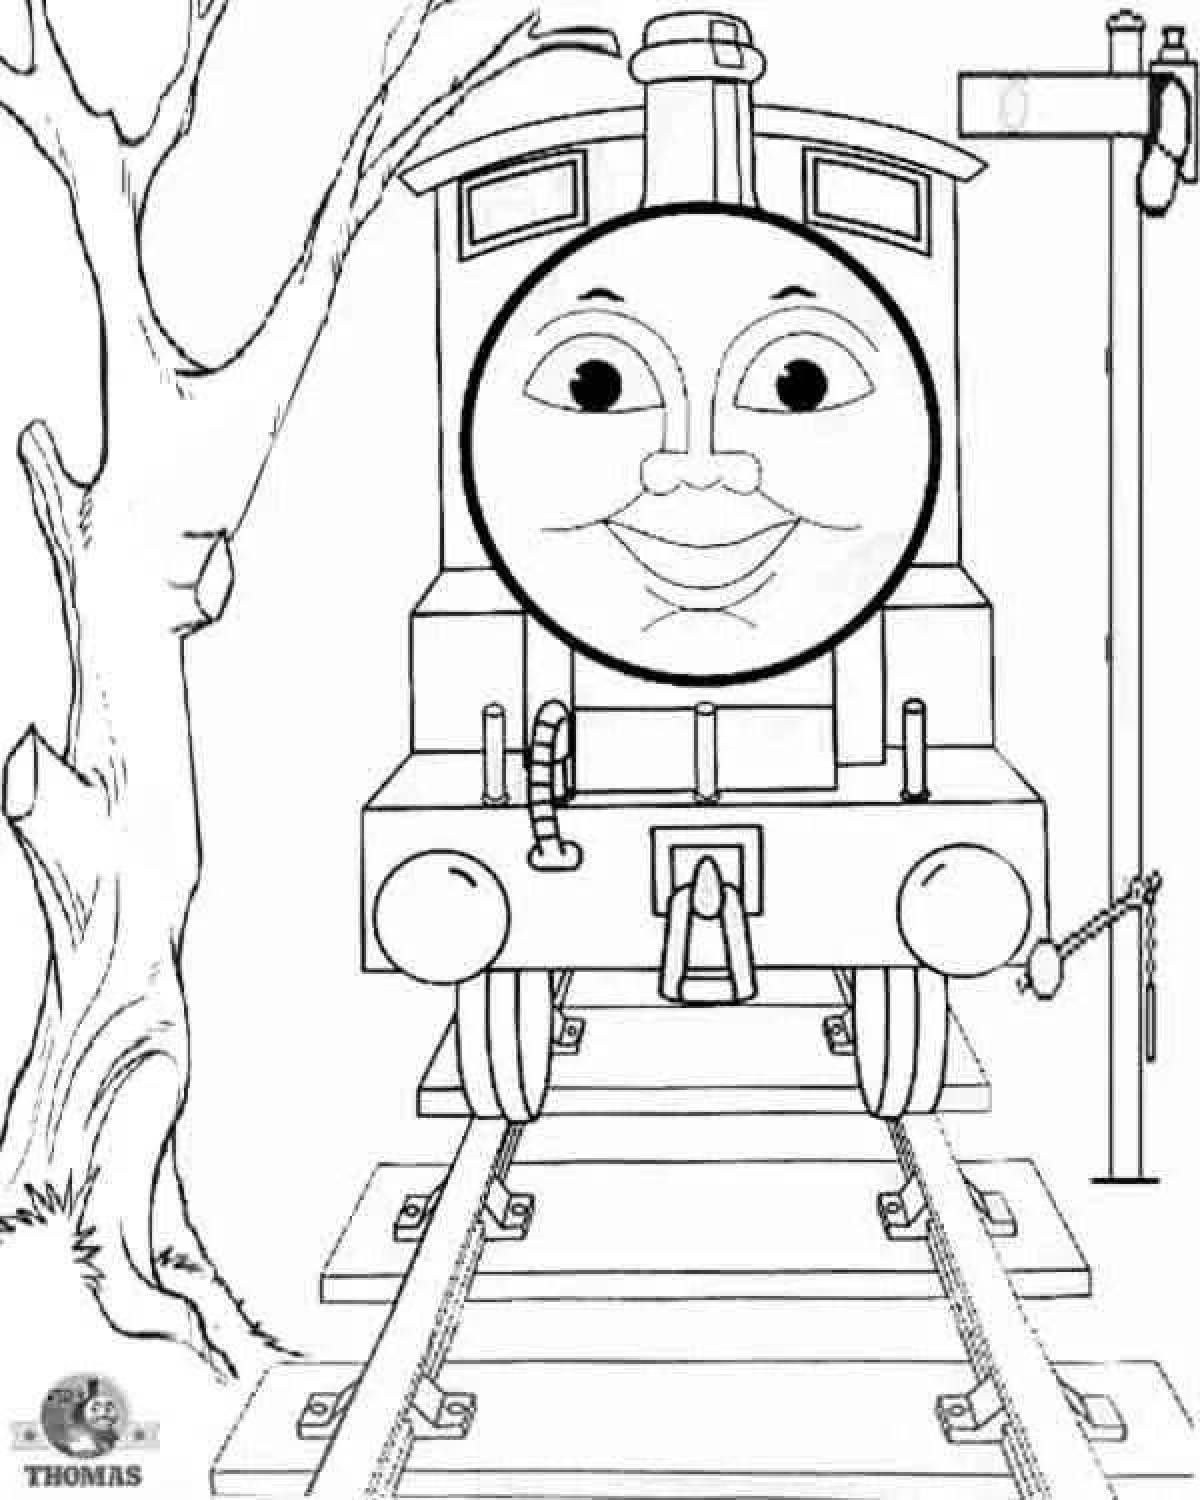 Thomas the tank engine iridescent coloring book